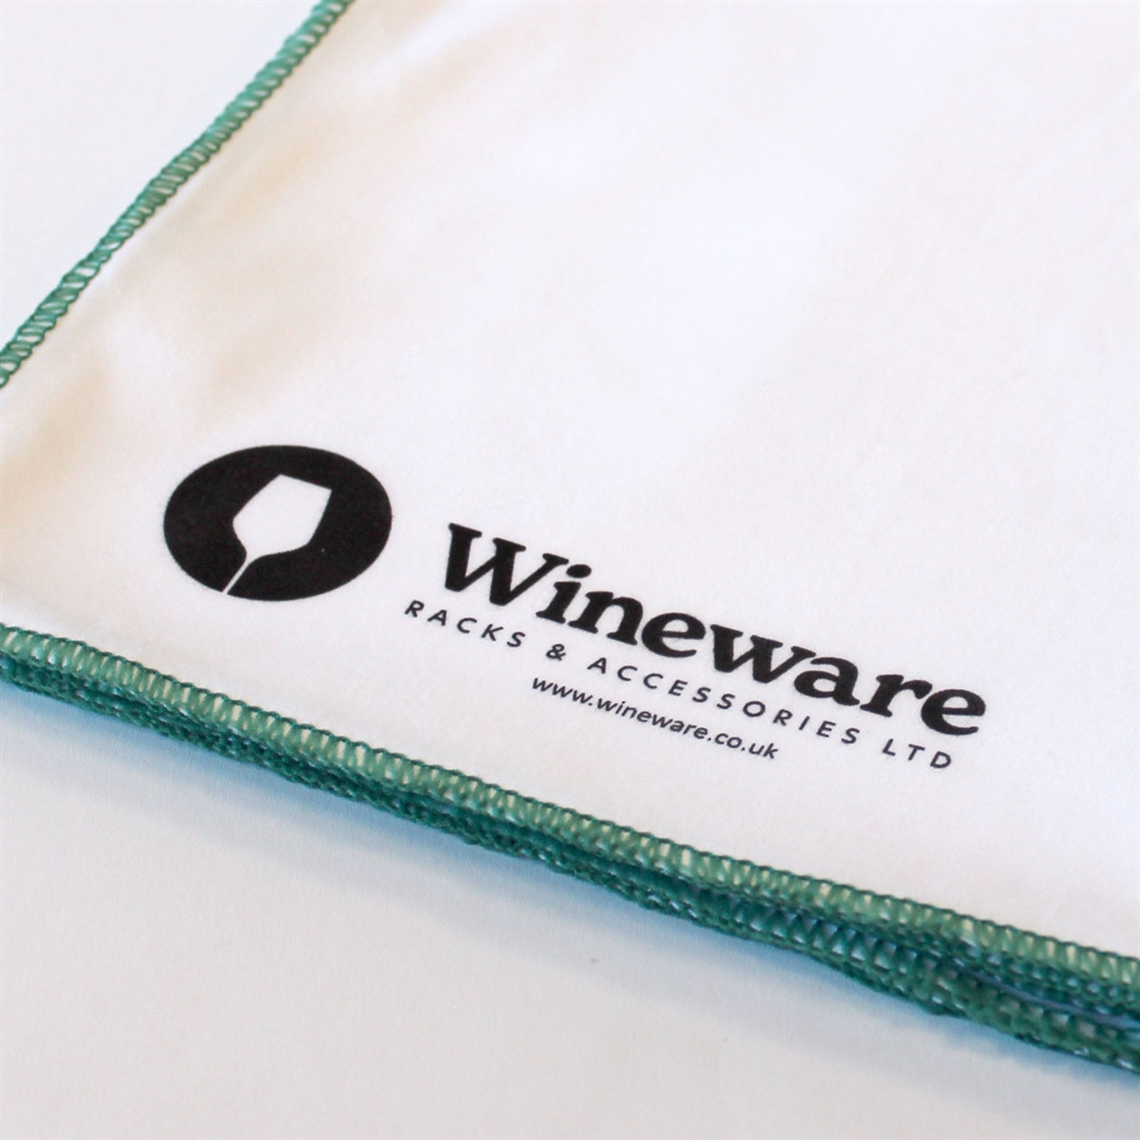 View more how to store open bottles of wine from our Wine Decanter Cleaning range